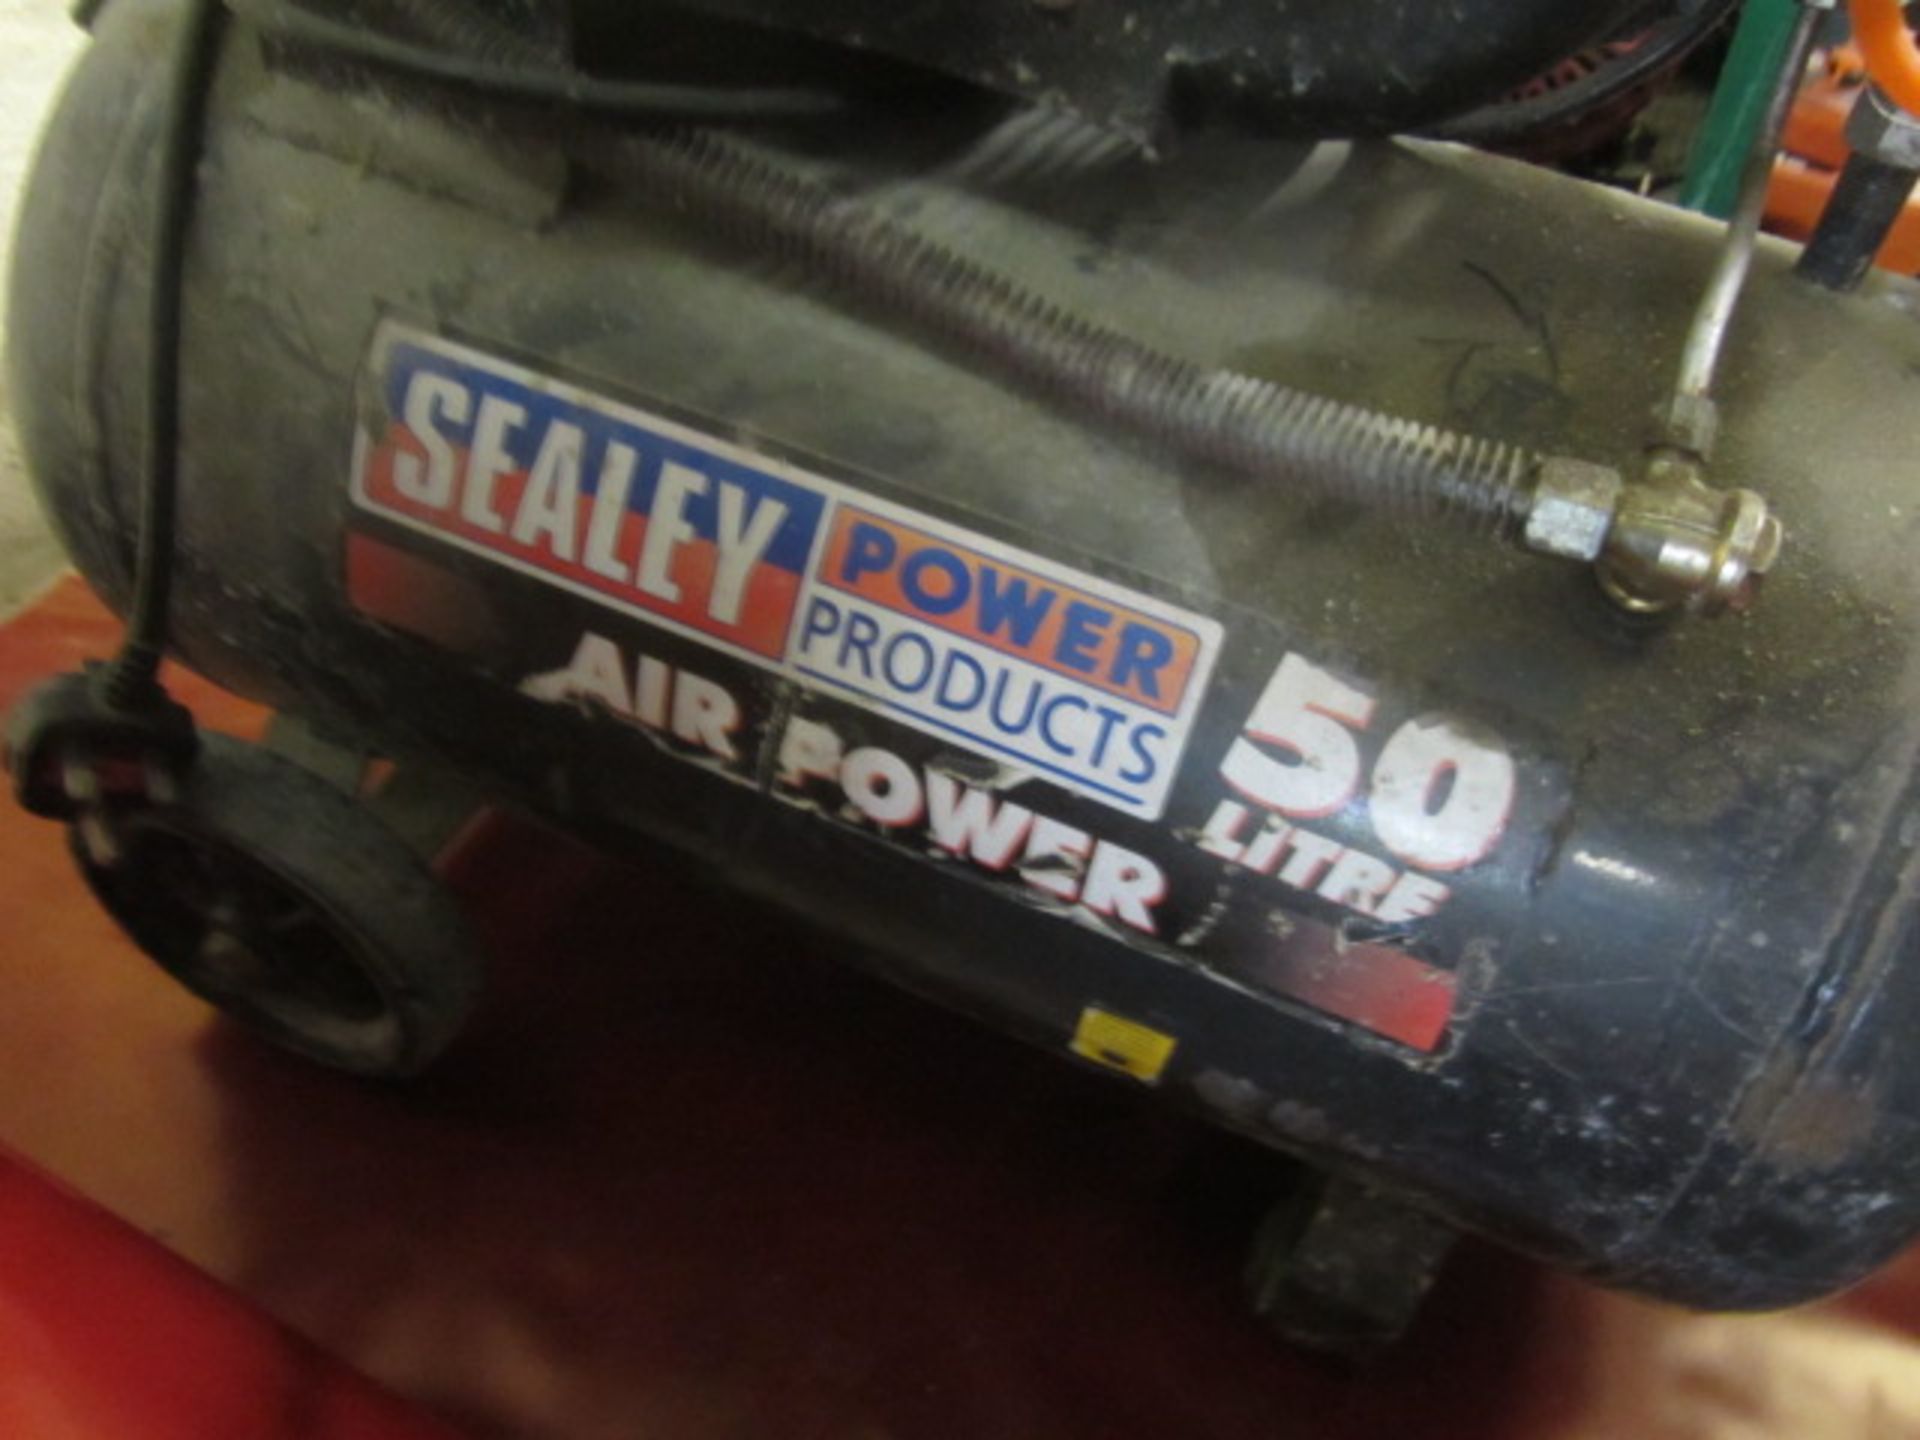 Sealey power Product 50 litre portable air compressor - working condition unknown ** Located: - Image 4 of 4